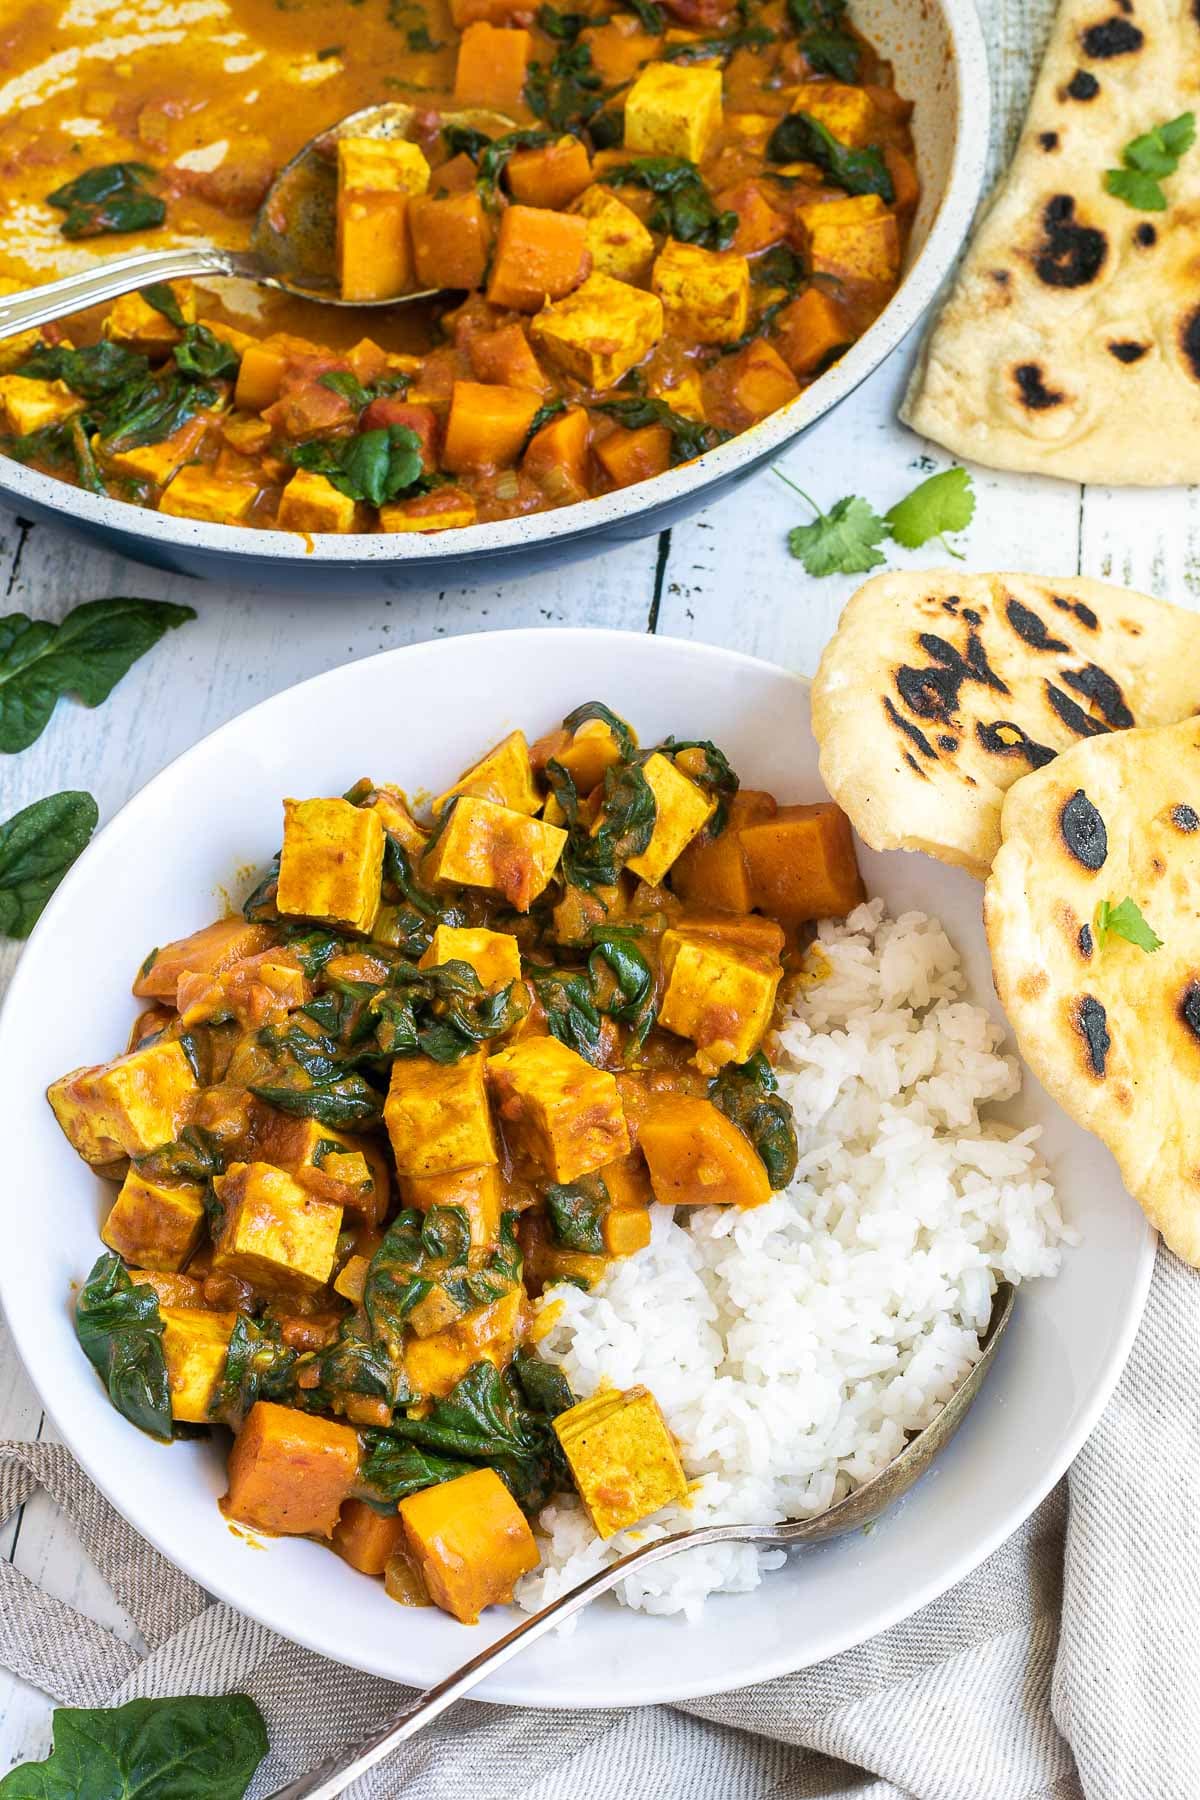 A white plate with white rice and tofu cubes, spinach leaves and orange sweet potato cubes in a thick orange curry sauce. Flatbread pieces are around it and the remaining curry in a white frying pan.